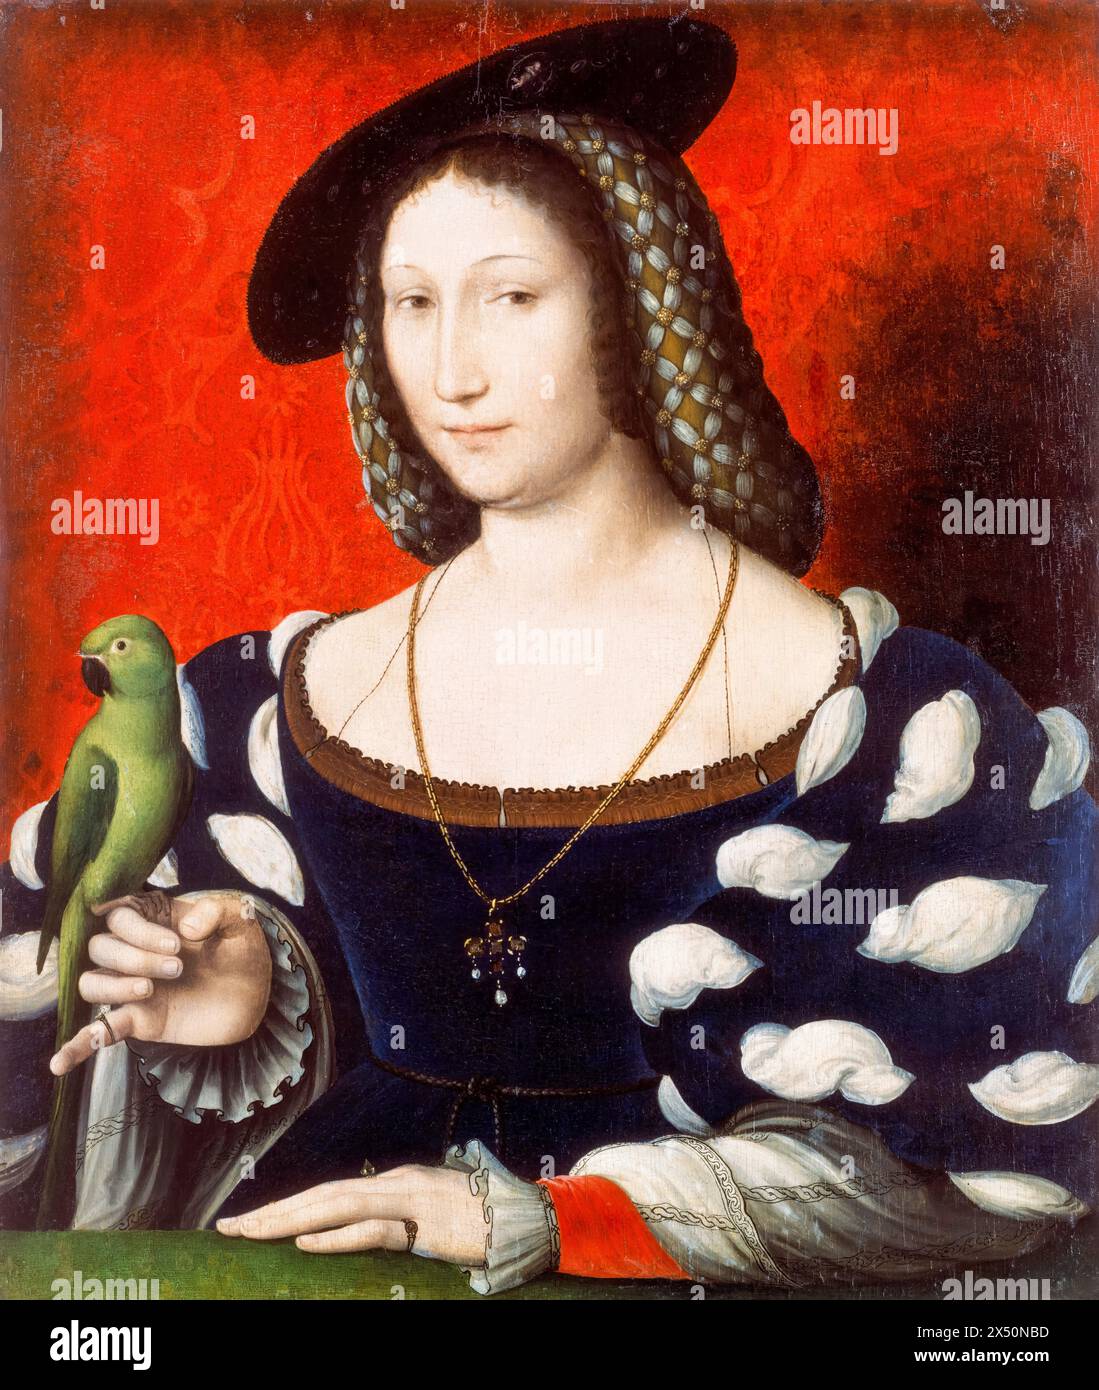 Margaret of Navarre (1492-1549), wife of Henry II (1503-1555), King of Navarre, portrait painting in oil on wood by Jean Clouet (attributed), circa 1527 Stock Photo